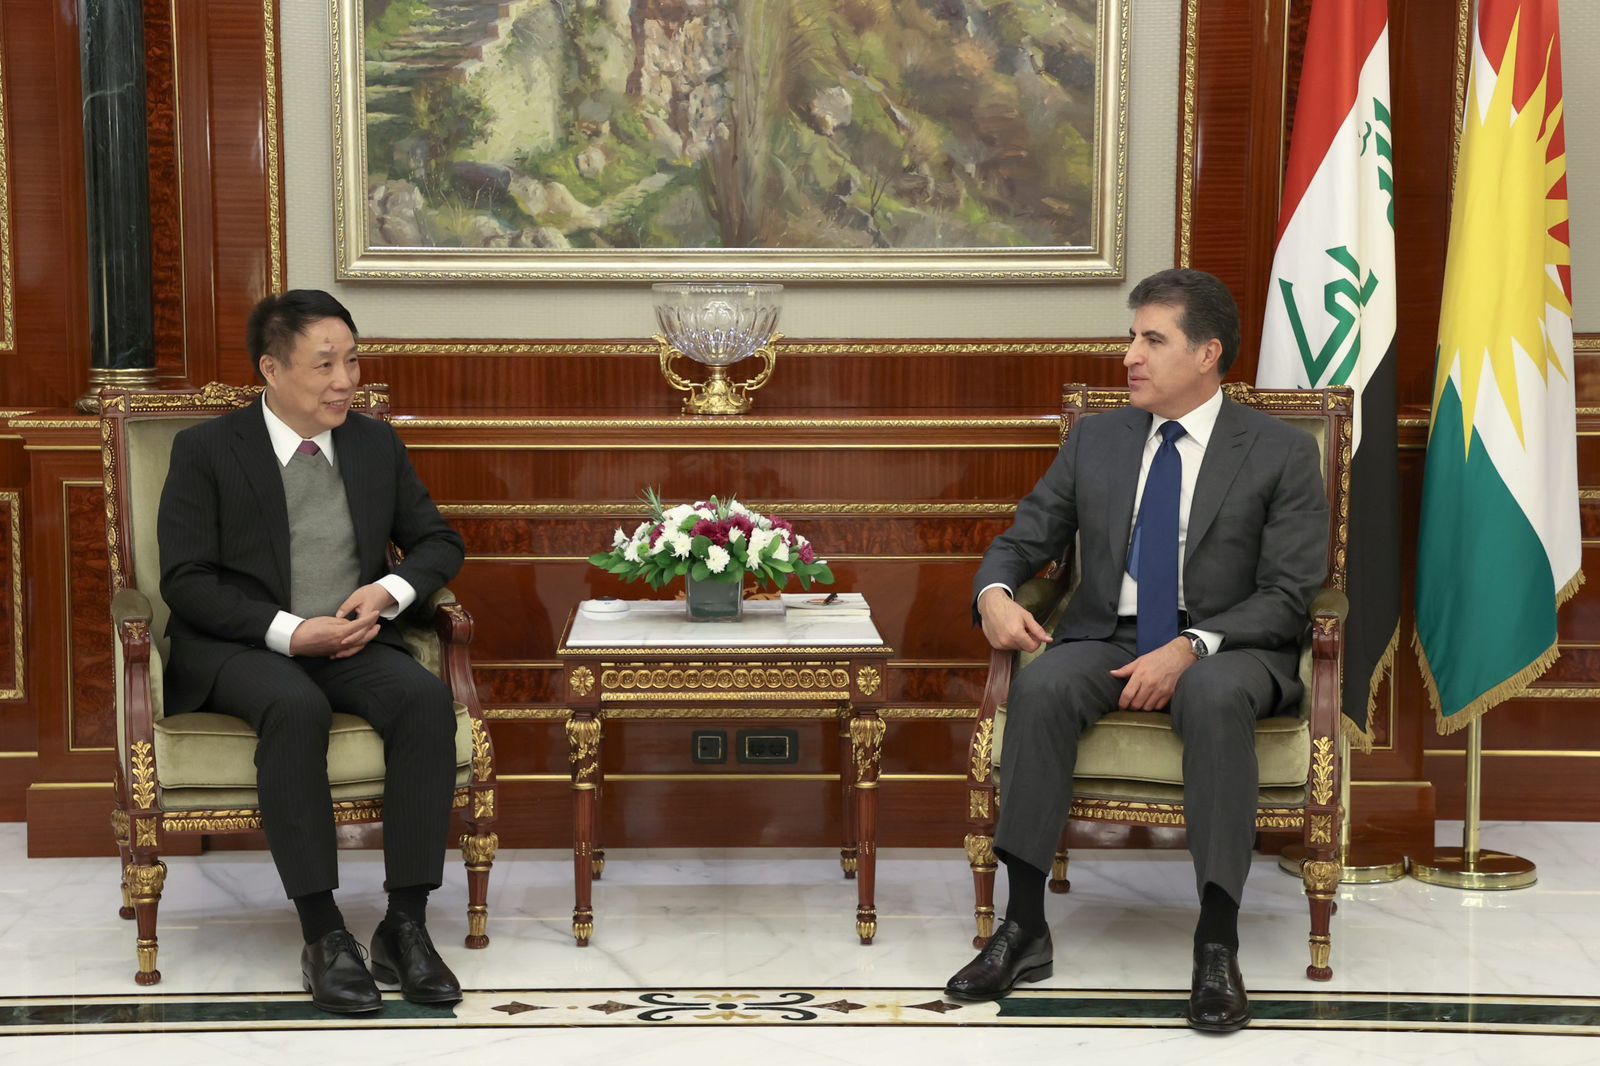 President Barzani: Kurdistan is looking to benefit from the Chinese projects in Iraq